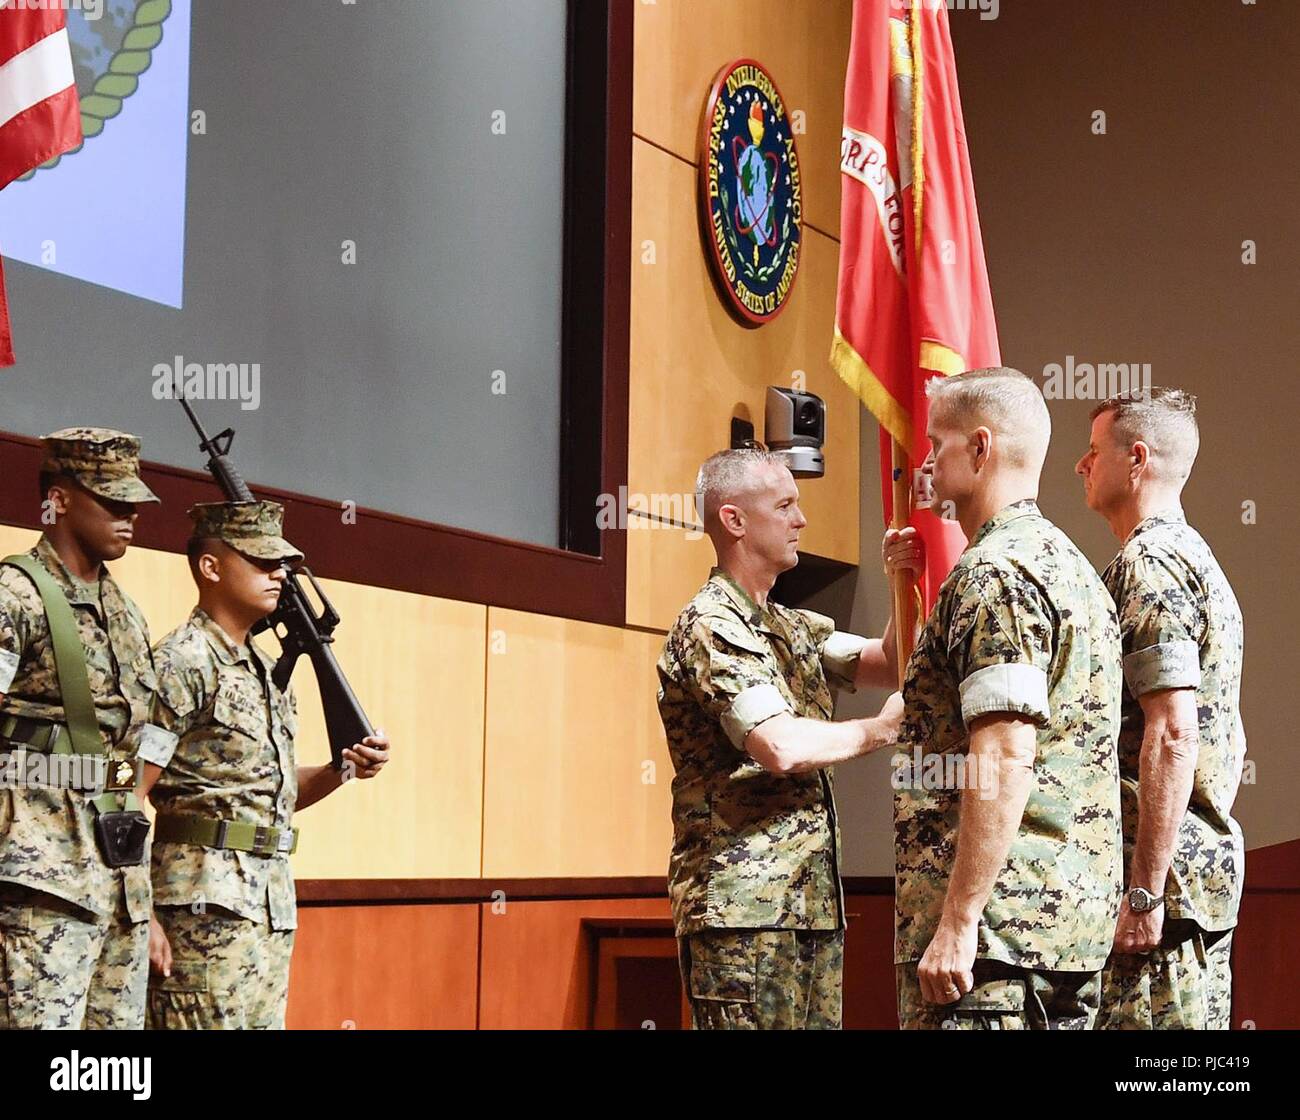 Sergeant Major William T. Thurber, U.S. Marine Corps Forces Central Command sergeant major, presents the MARCENT battle colors to Lt. Gen. Dave “Smoke” Beydler during a change of command ceremony at the Vince Tolbert Building at MacDill Air Force Base, July 11. Beydler, who has served as the MARCENT commander since Oct. 27, 2015, will pass the battle colors to Lt. Gen. Carl E. Mundy, III, representing the exchange of command. Stock Photo